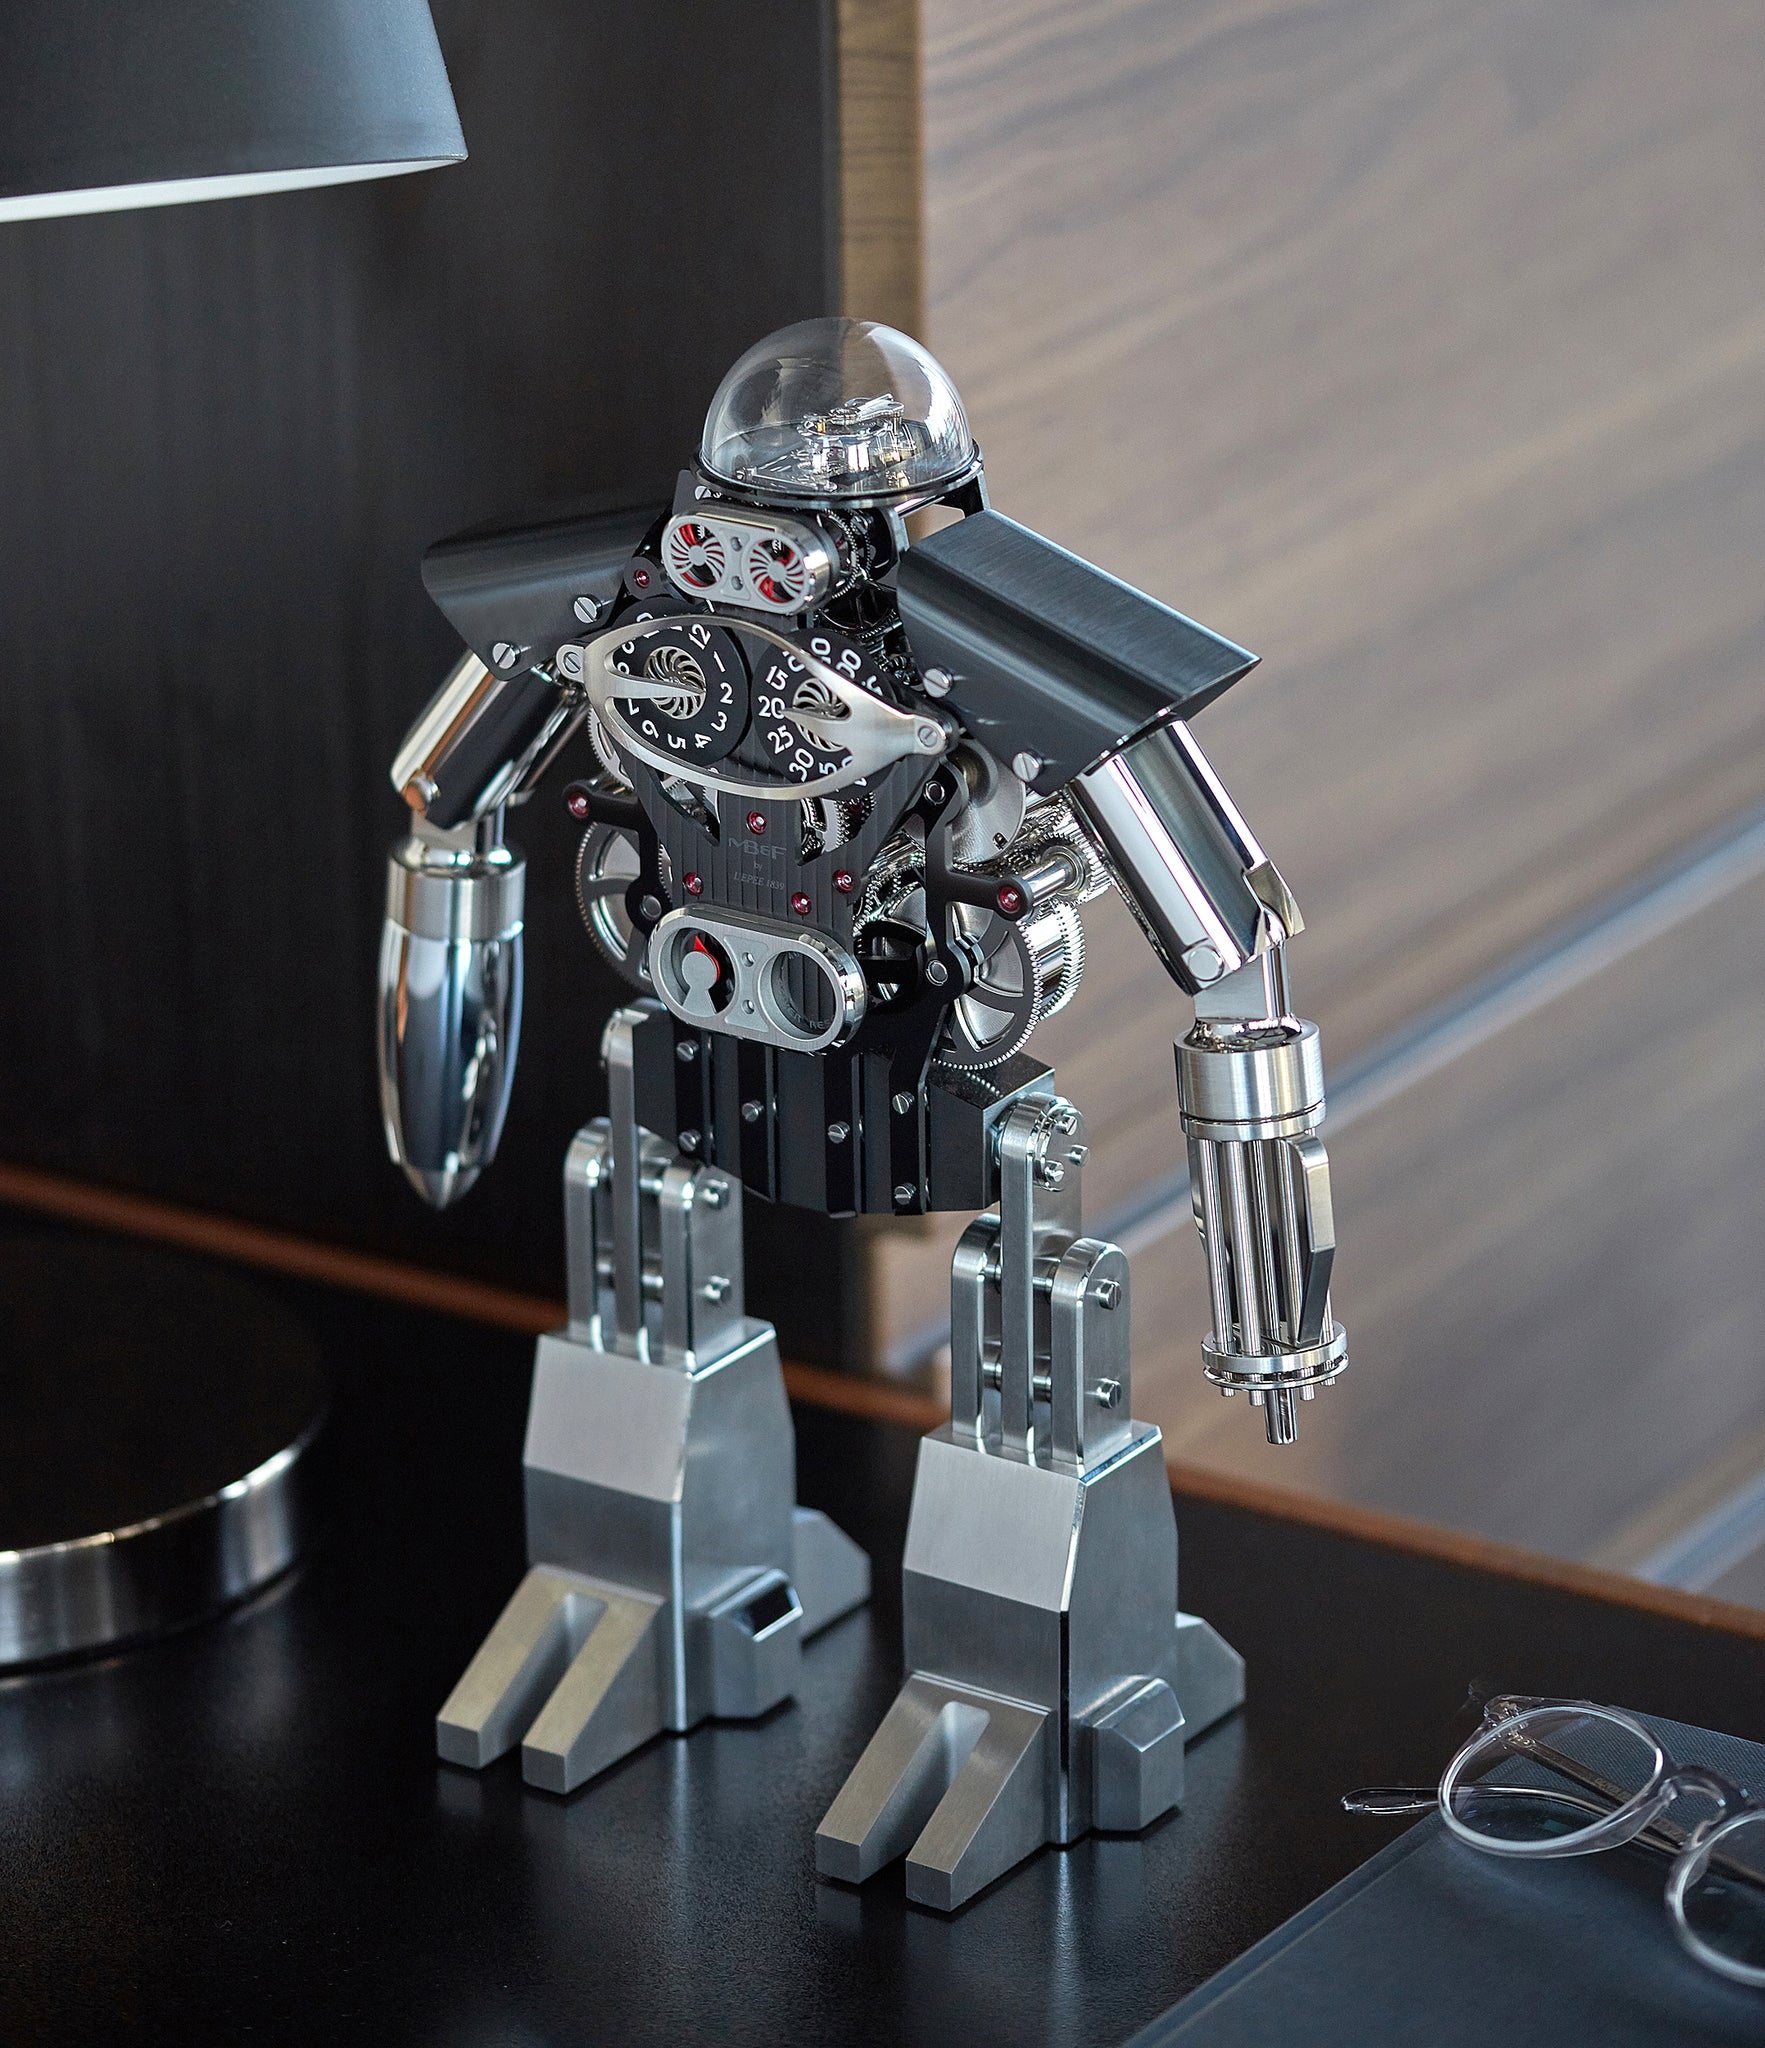 Limited Edition MB&F Melchio L'Epee "Dark" roboclock robotic desk clock for sale online at A Collected Man London